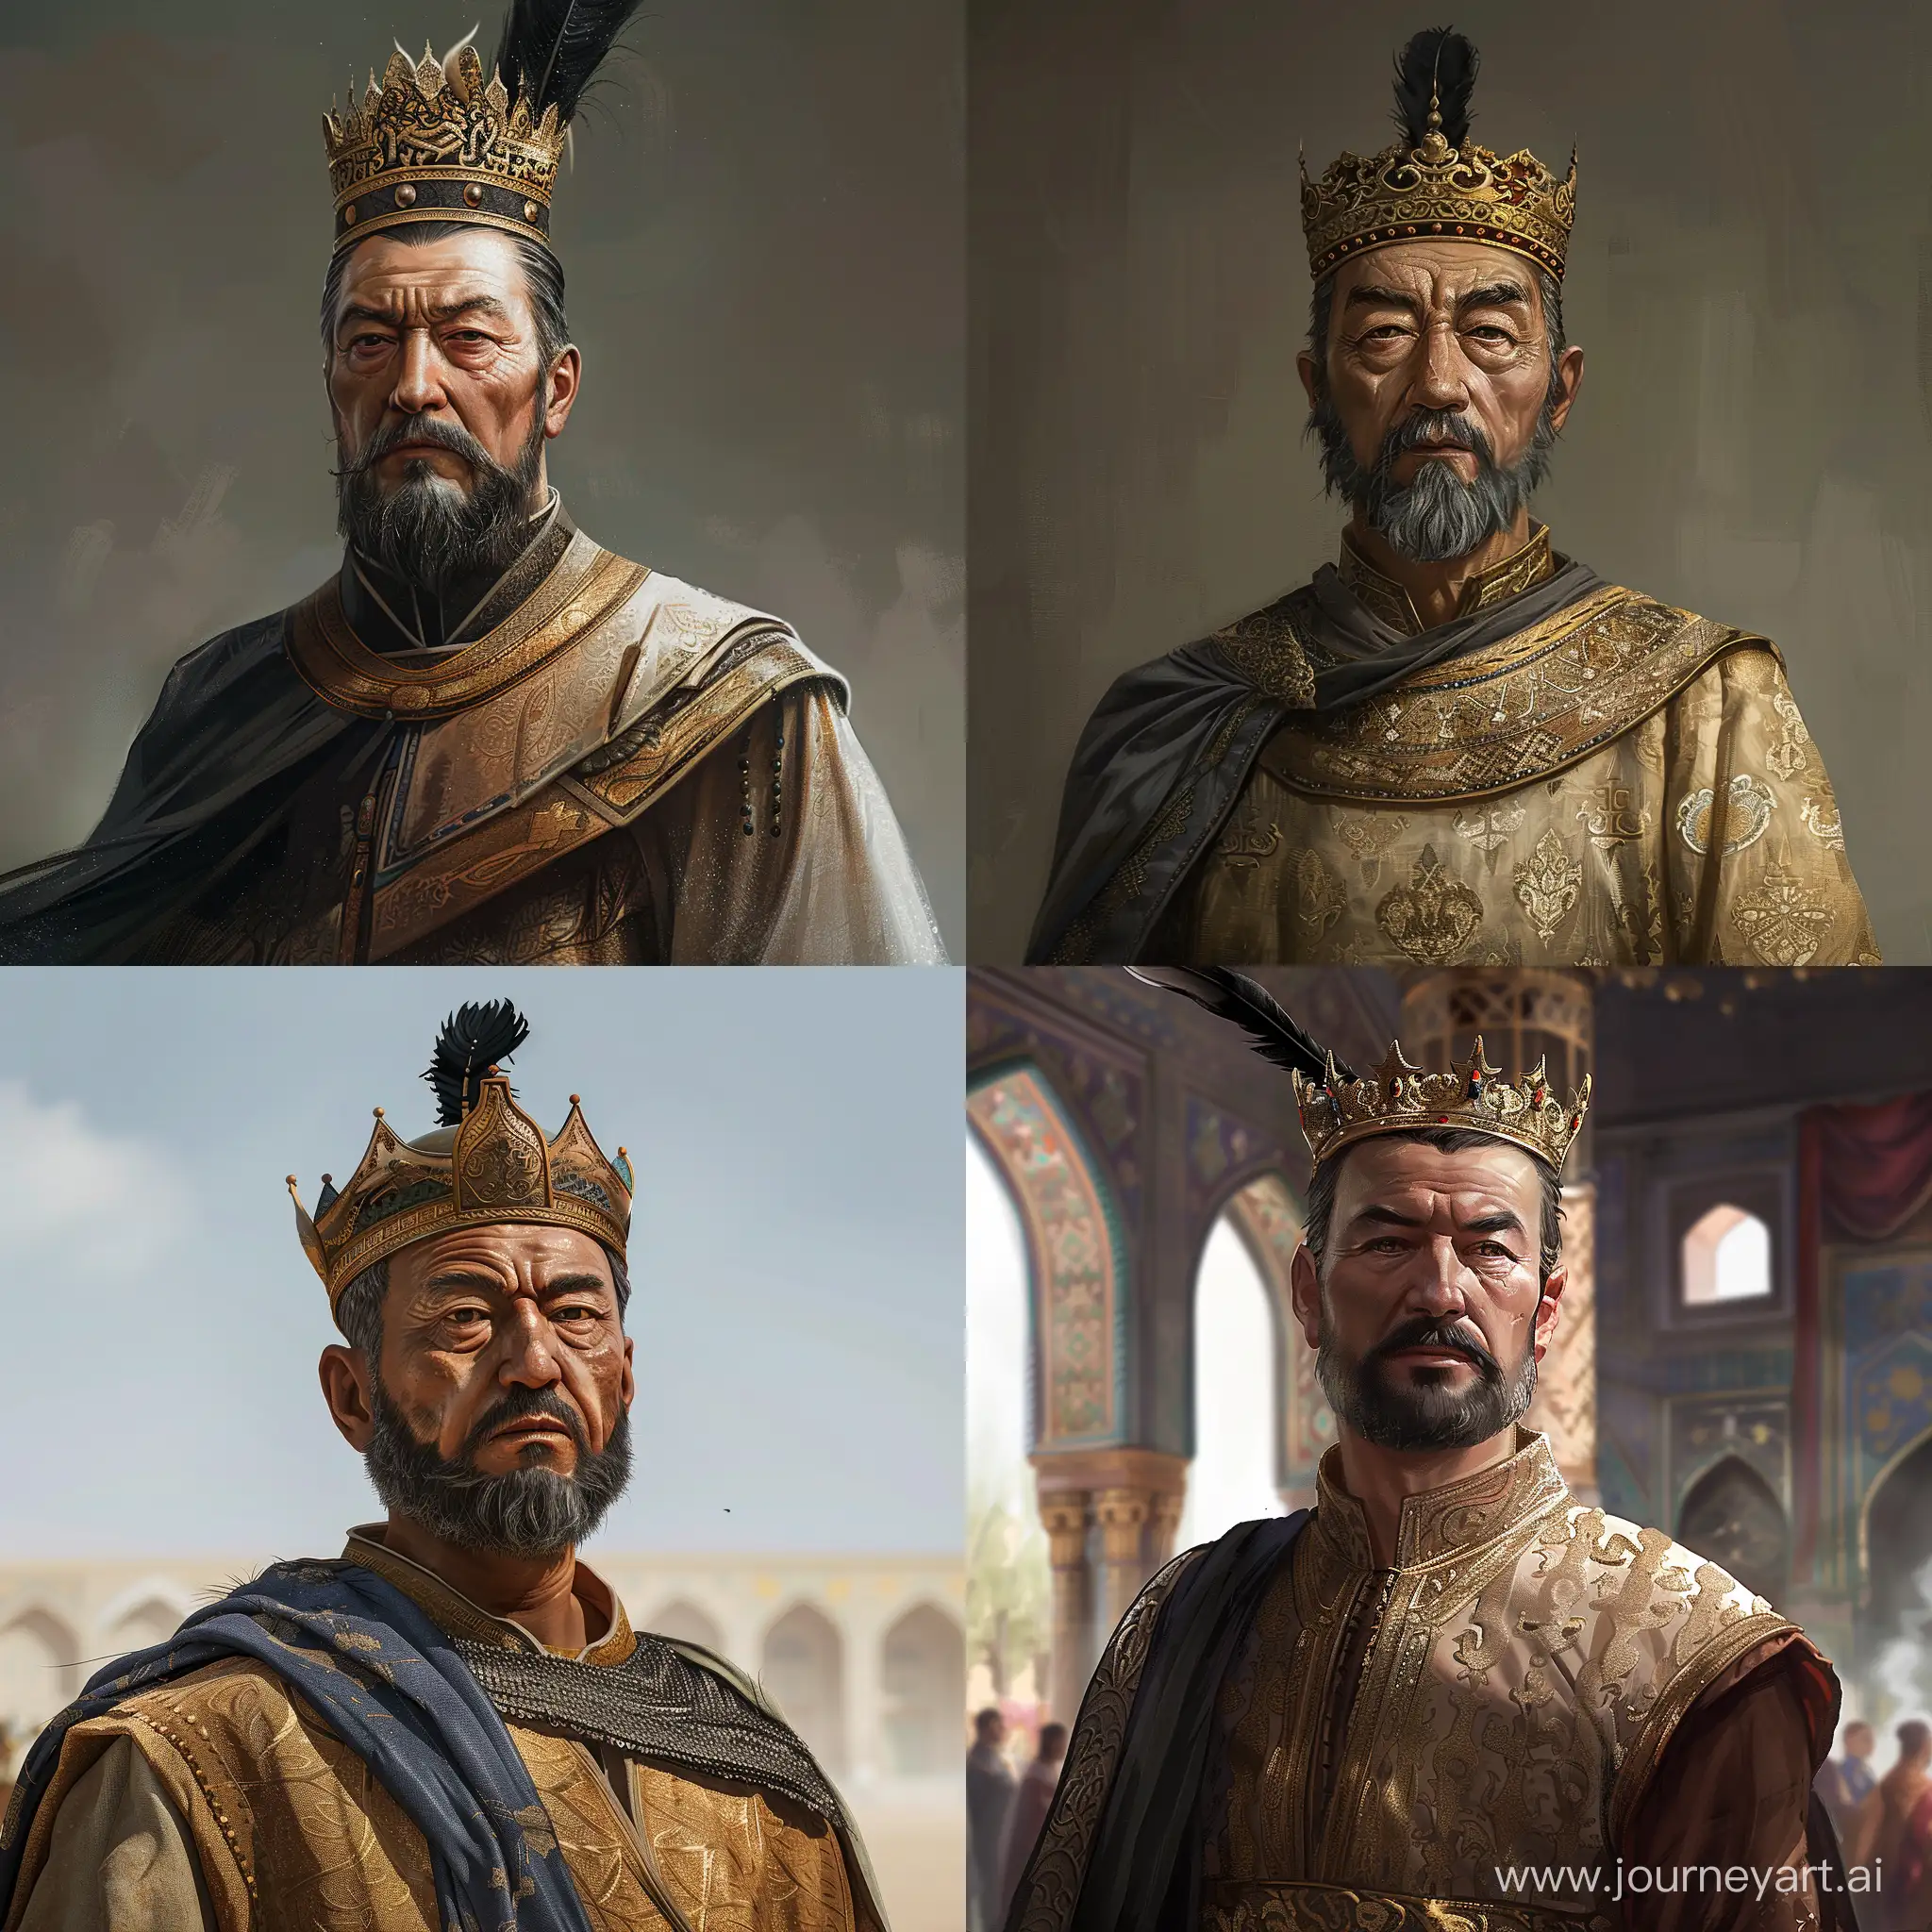 Realistic image of 60 years old Timur standing tall at Samarkand. Founder of Timurid Empire. Turko-Mongol genetics. Prominent face, high cheekbone, shaped short beard and Asian monolid slanted eyes. He is wearing a gold crown with a black feather on it. Luxury tunic and a short cloak on it. 